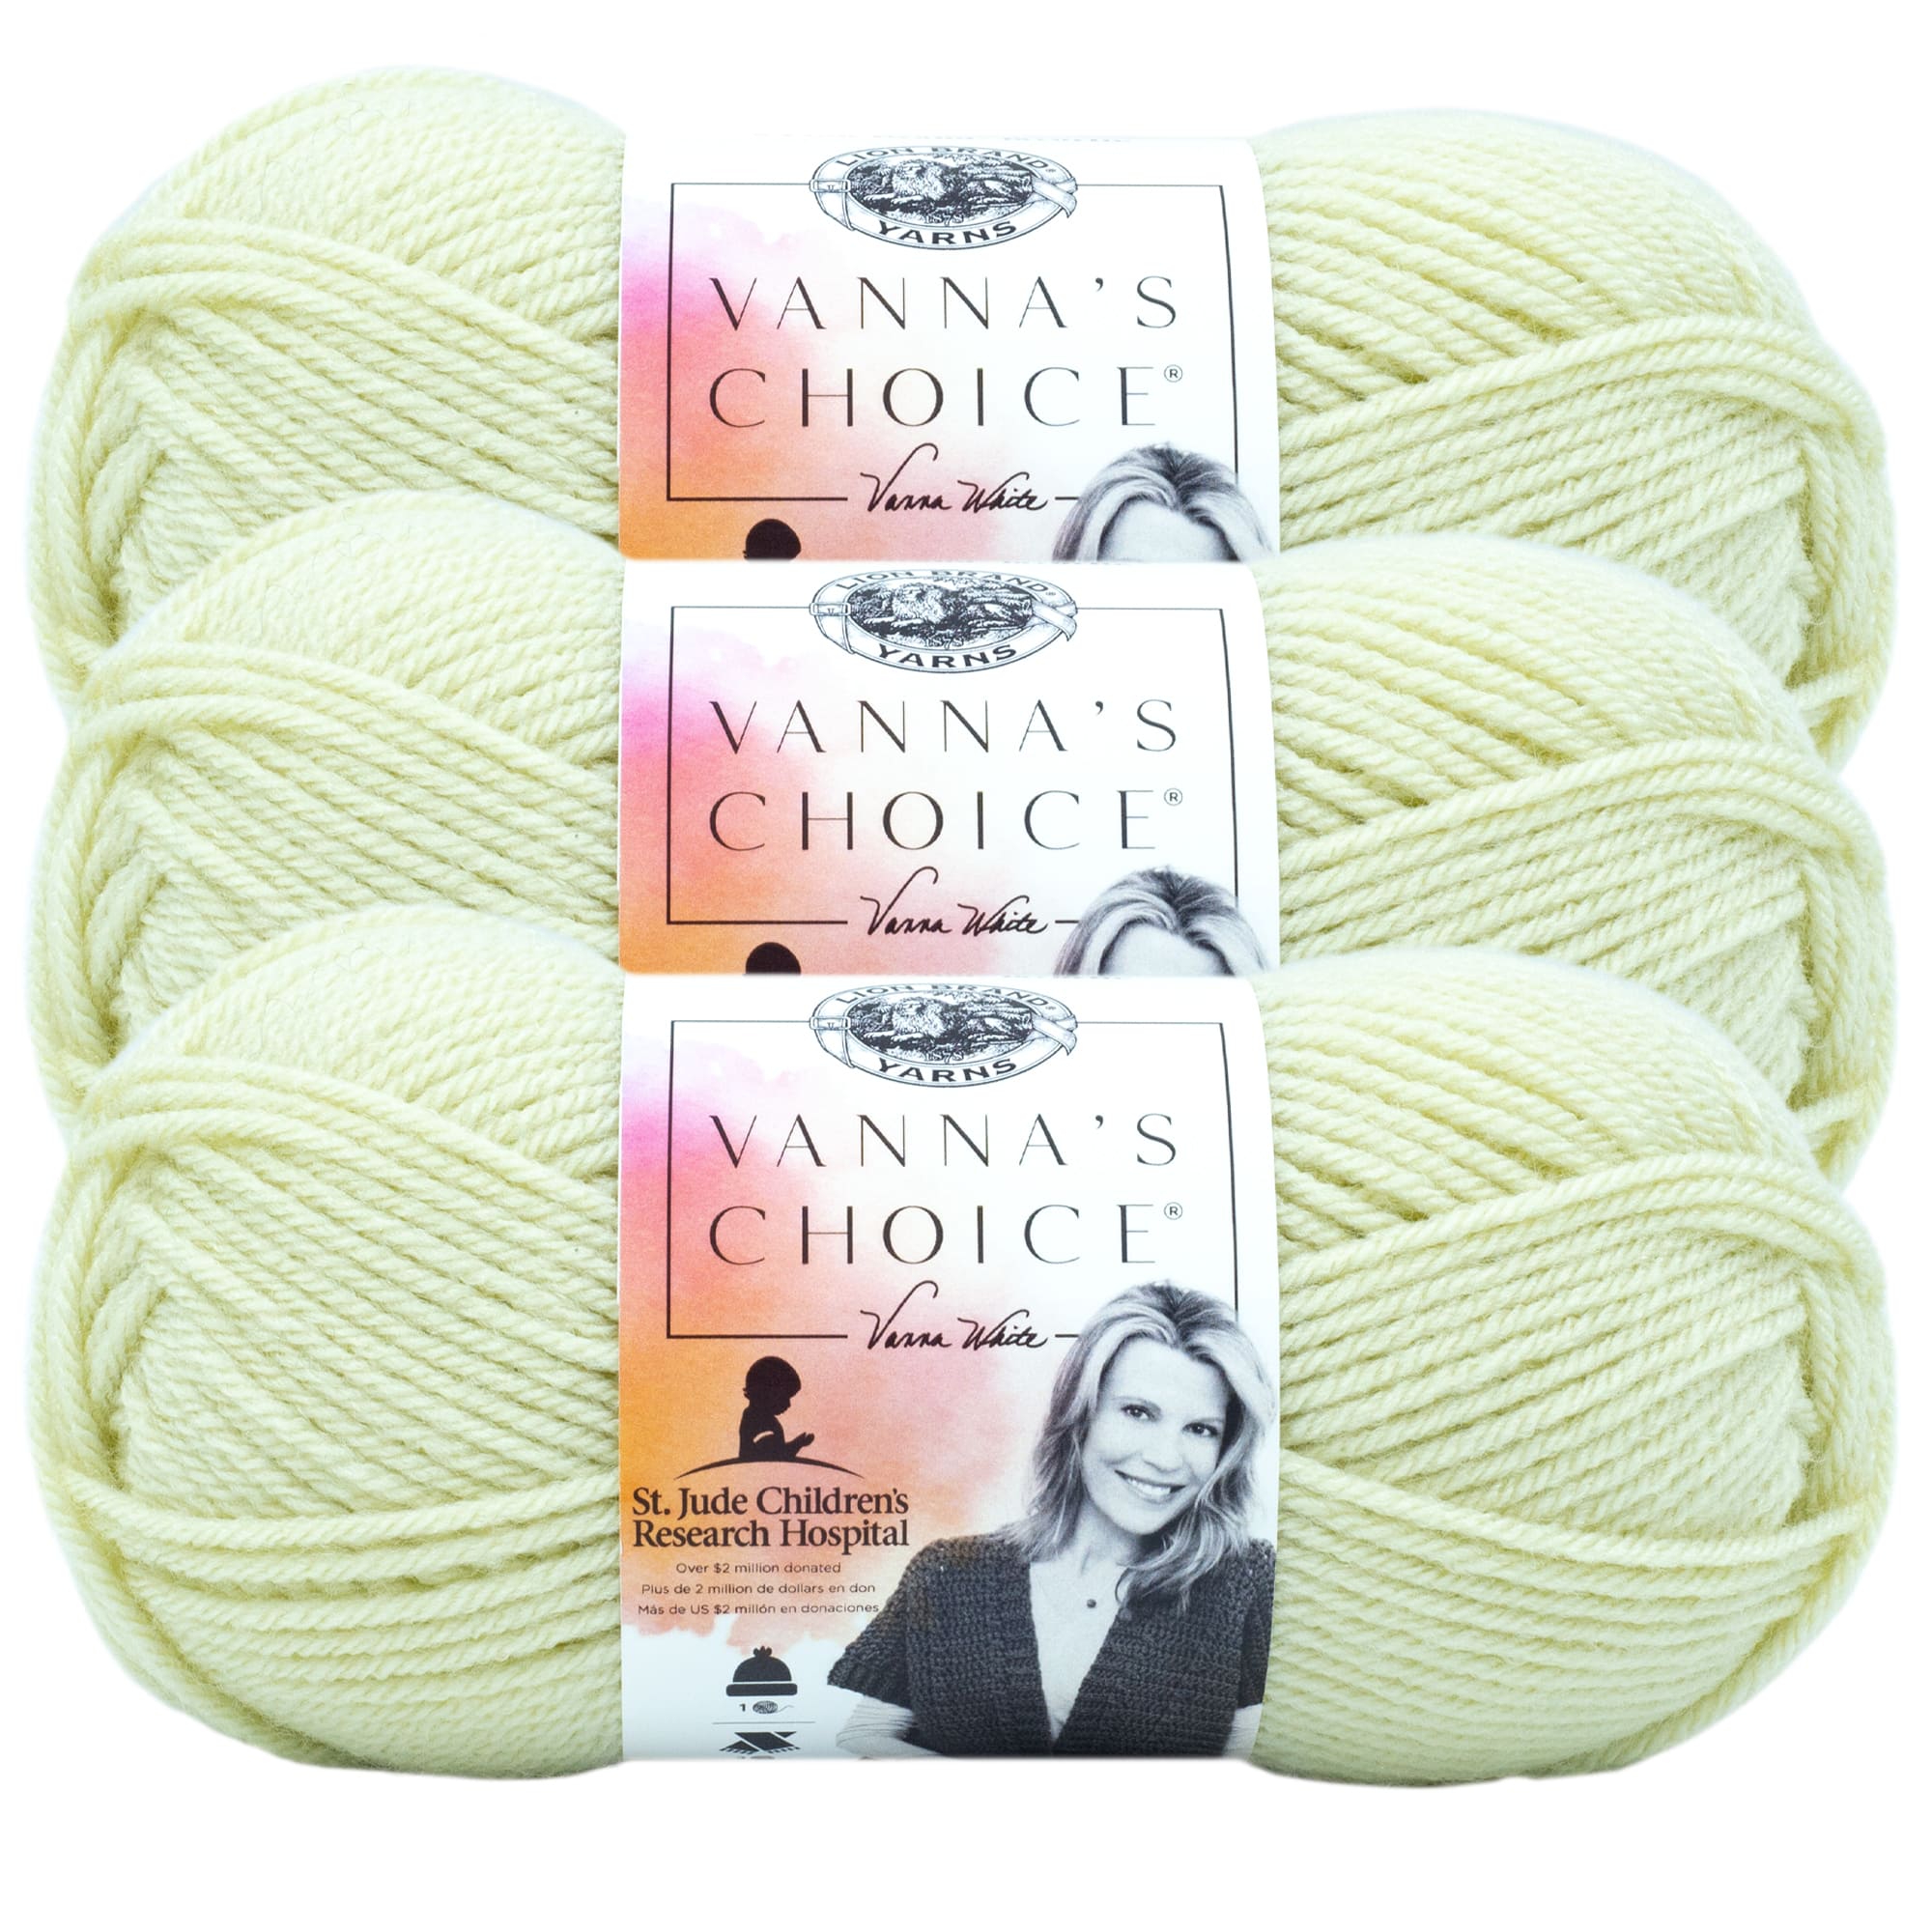 Lion Brand Vanna's Choice Yarn in Canada, Free Shipping at